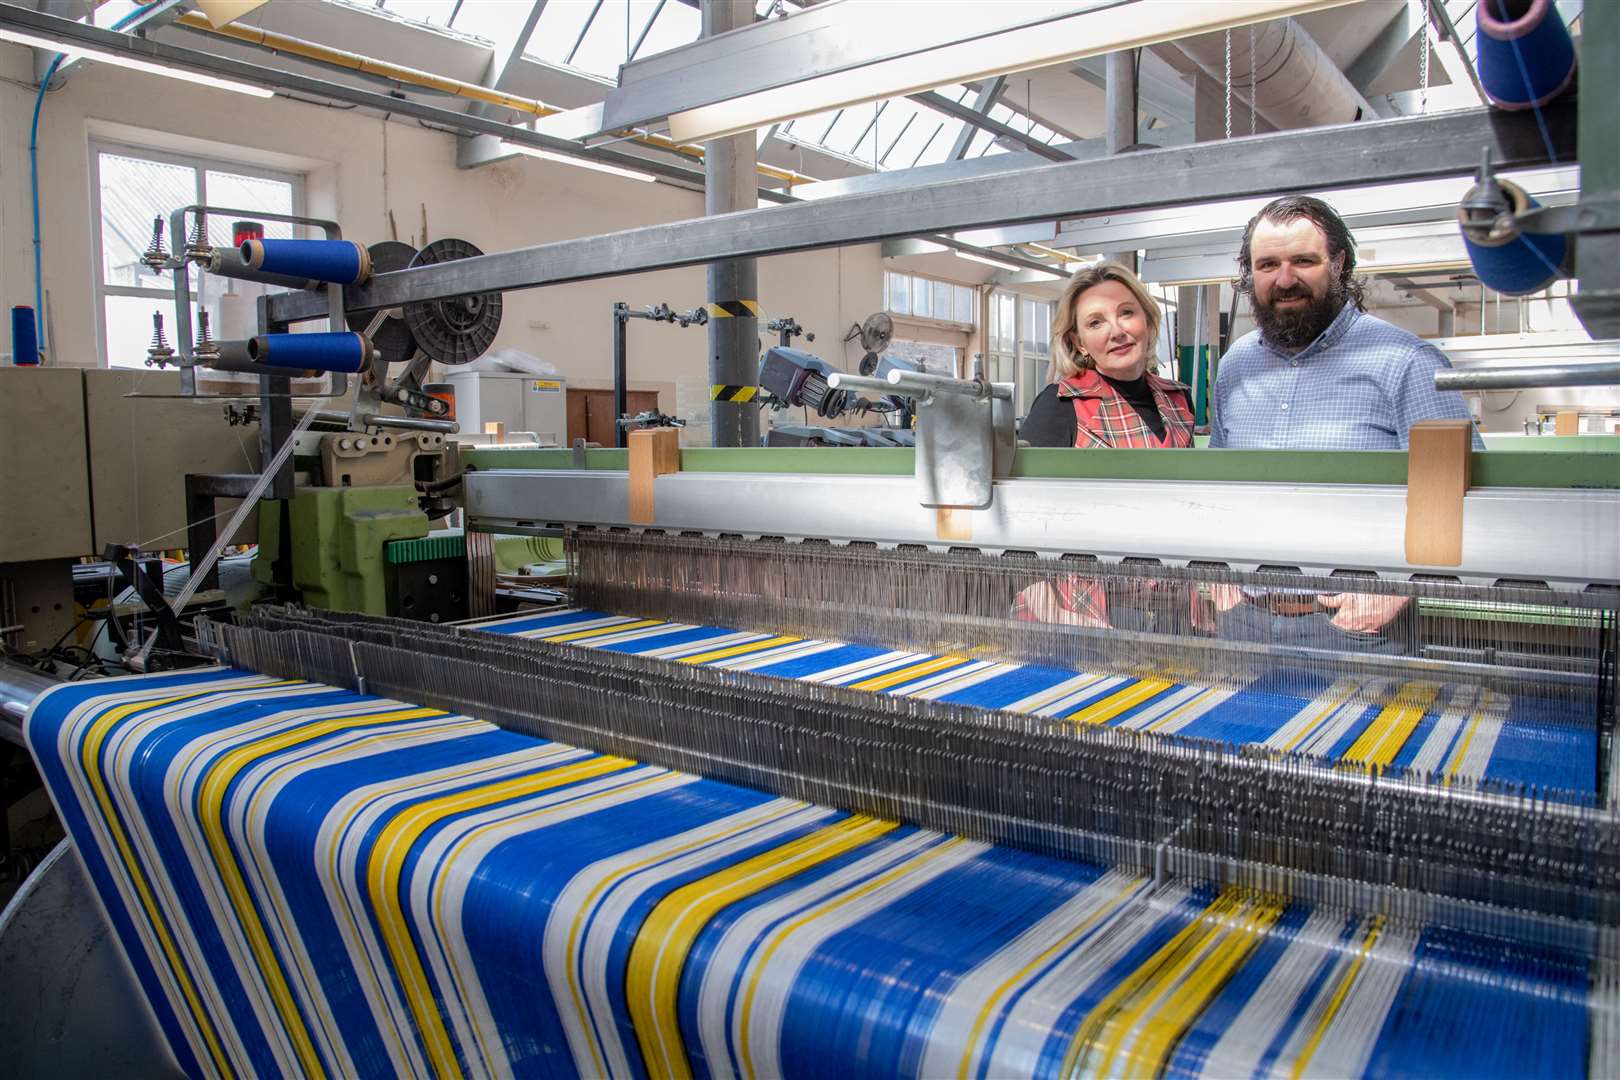 The Ukrainian Tartan produced by Great Scot in Keith in production. Picture: Daniel Forsyth